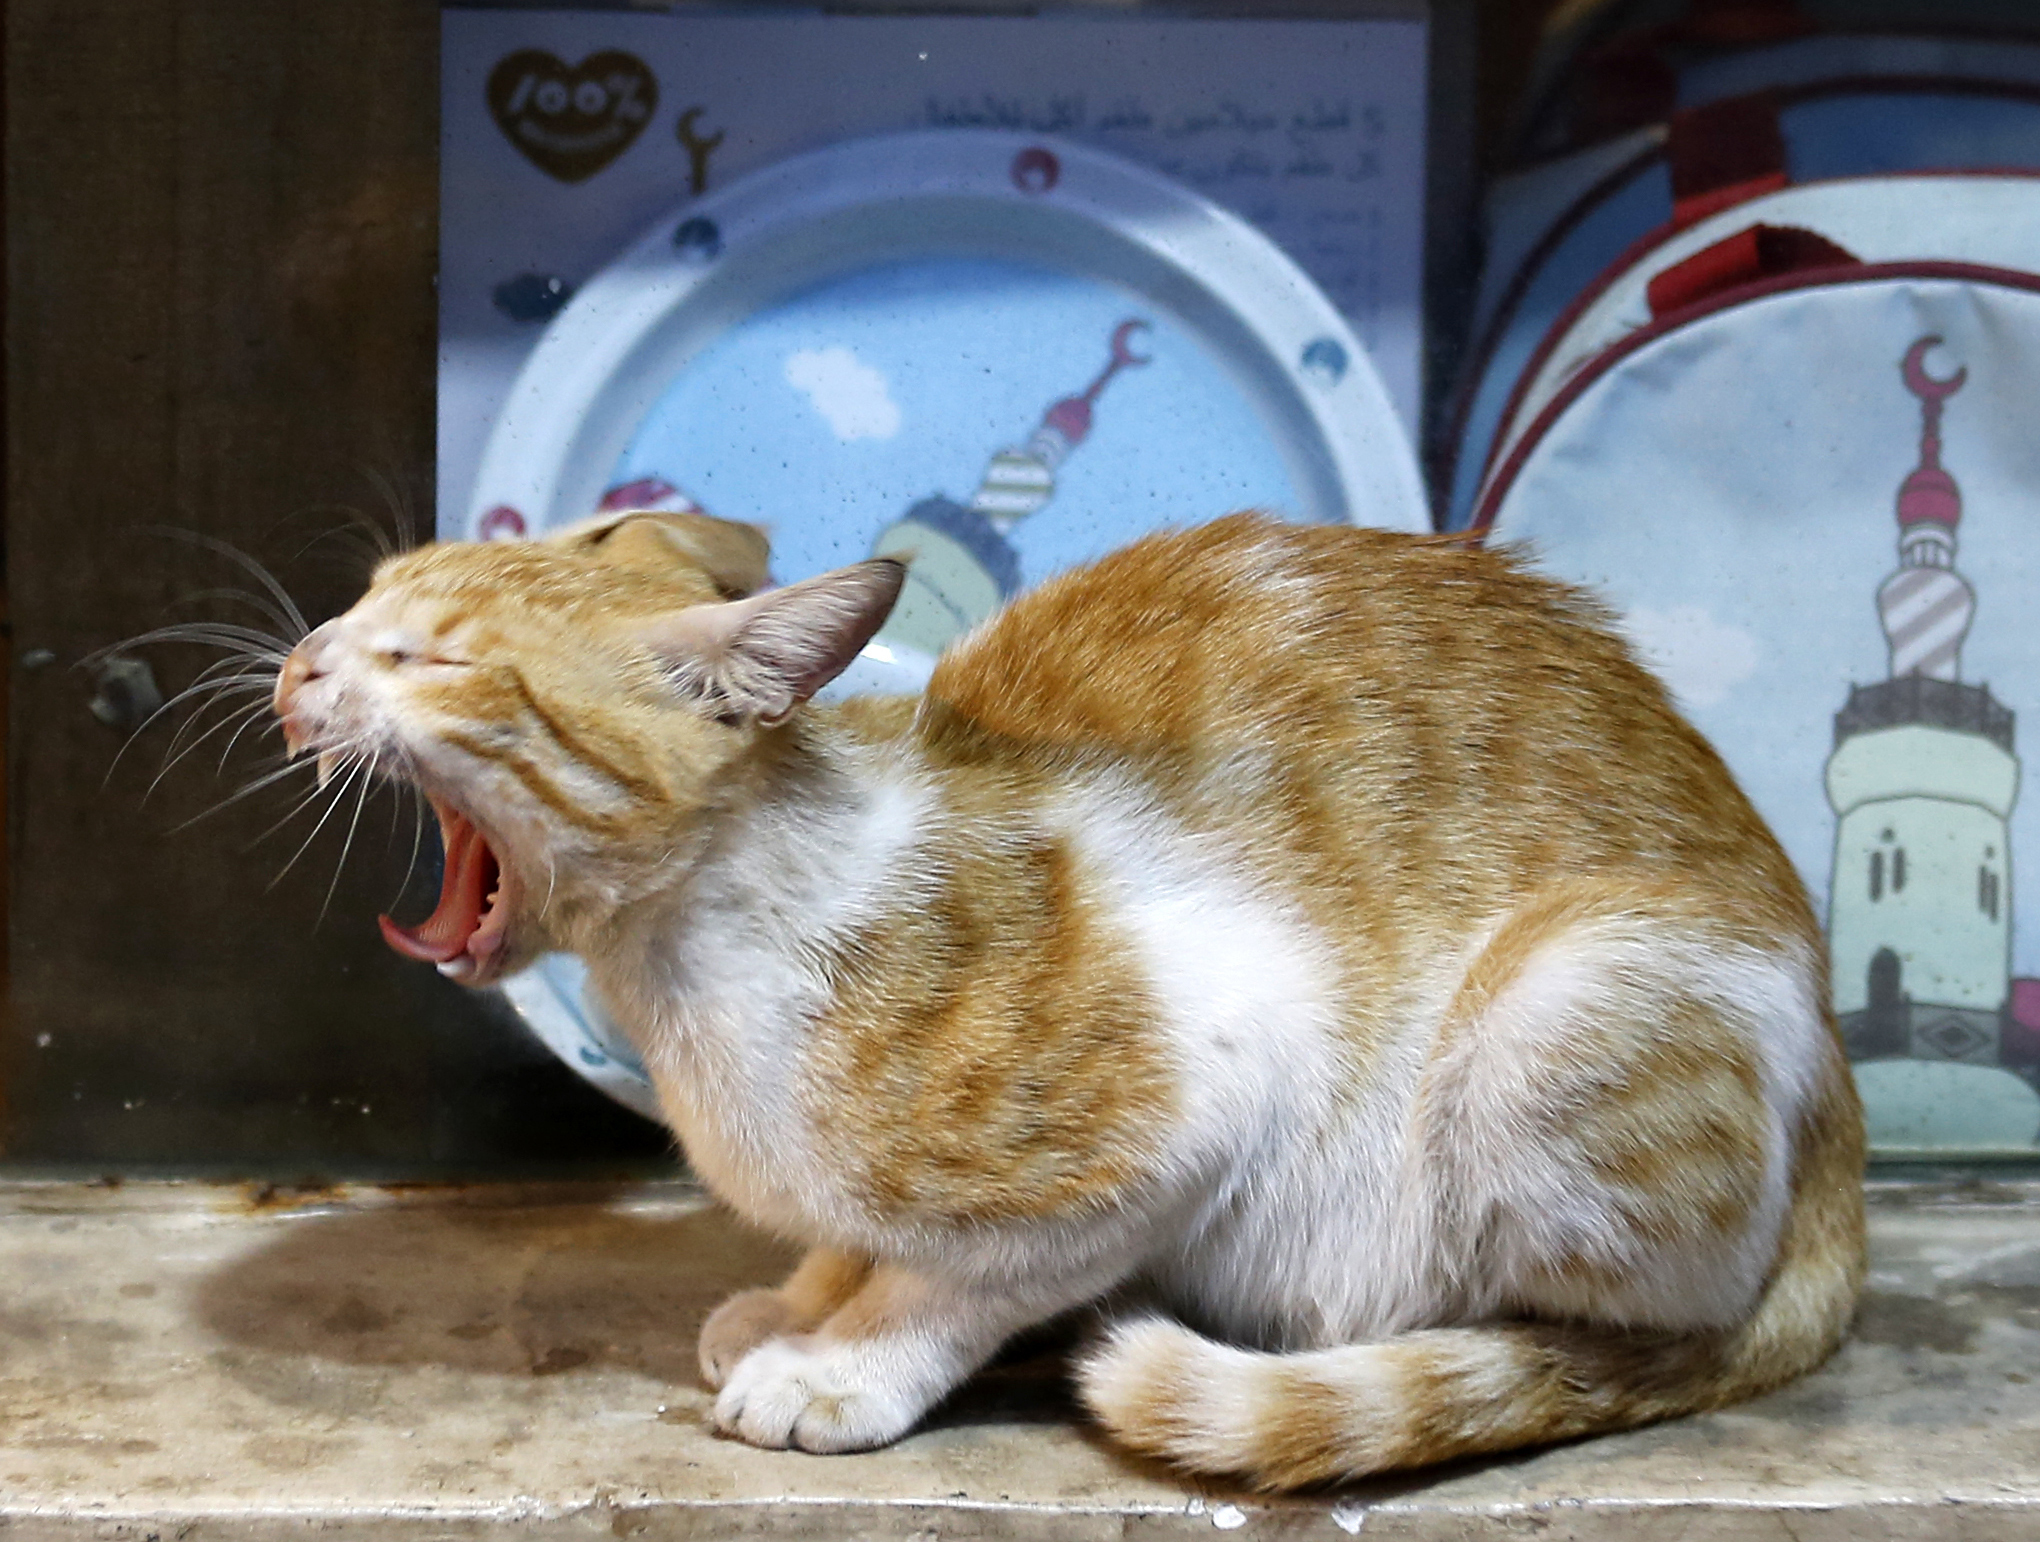 A cat yawns as it sets at a bazar in Jiddah old city, Saudi Arabia, on December 31, 2019